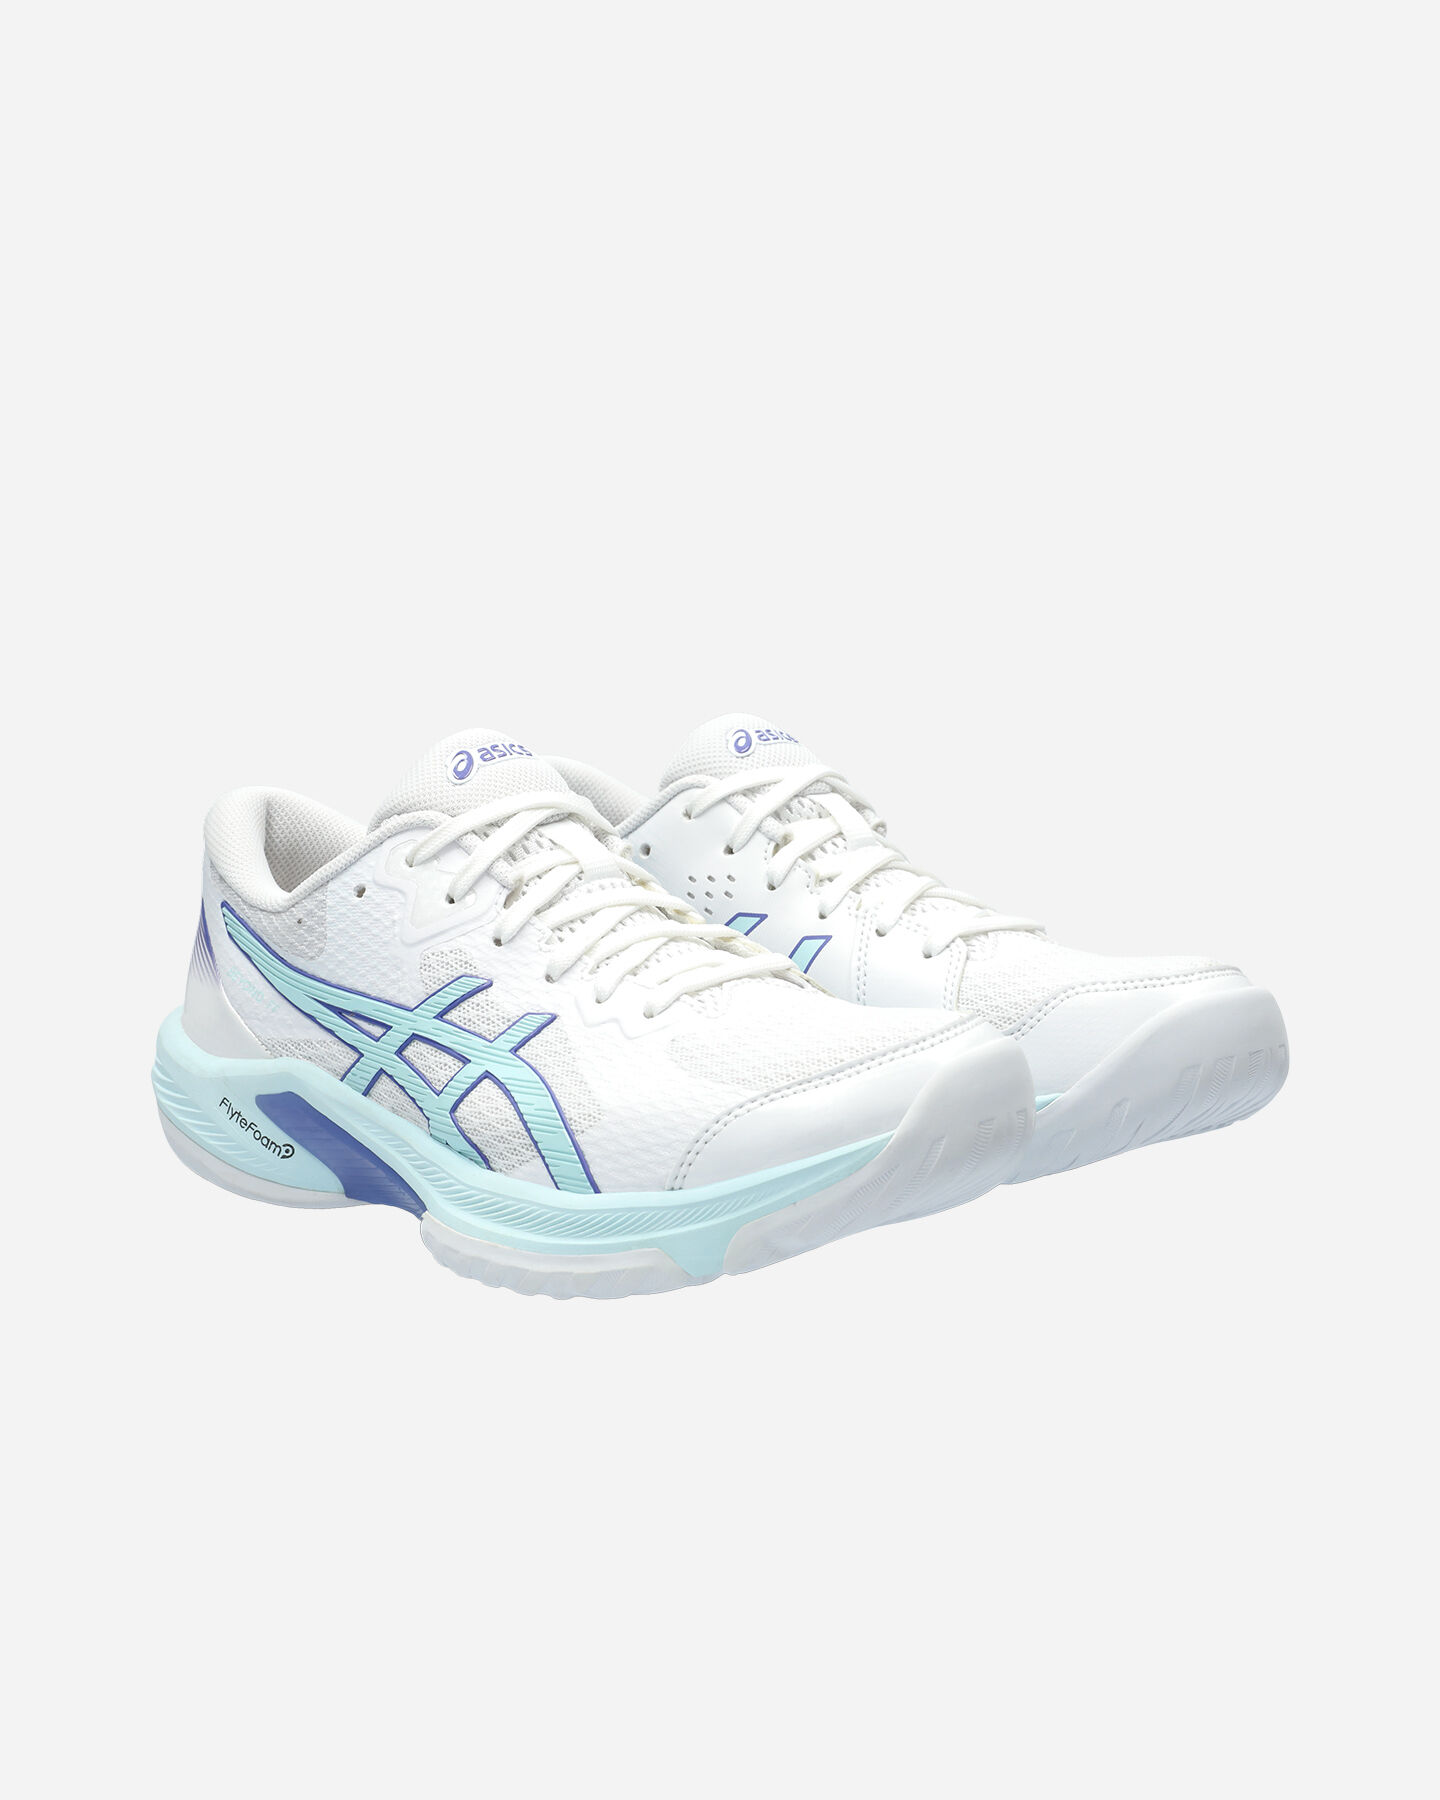  Scarpe volley ASICS BEYOND W S5585396|100|8 scatto 1